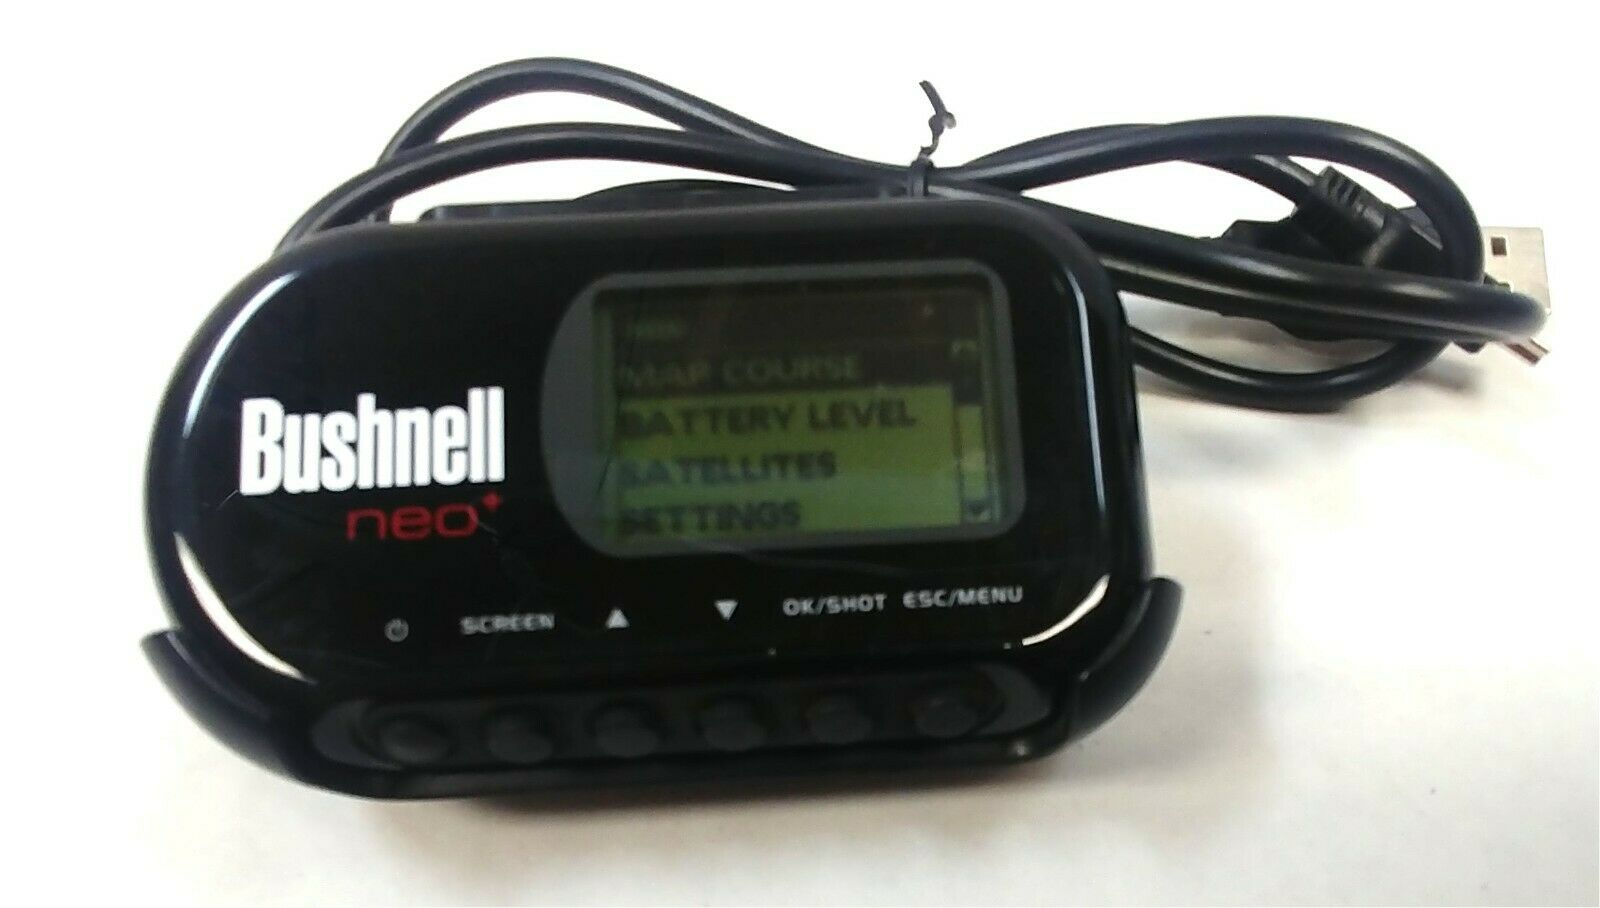 Bushnell Neo Plus Golf Gps Rangefinder 36 8150 W/ Charging Cable Powers Up